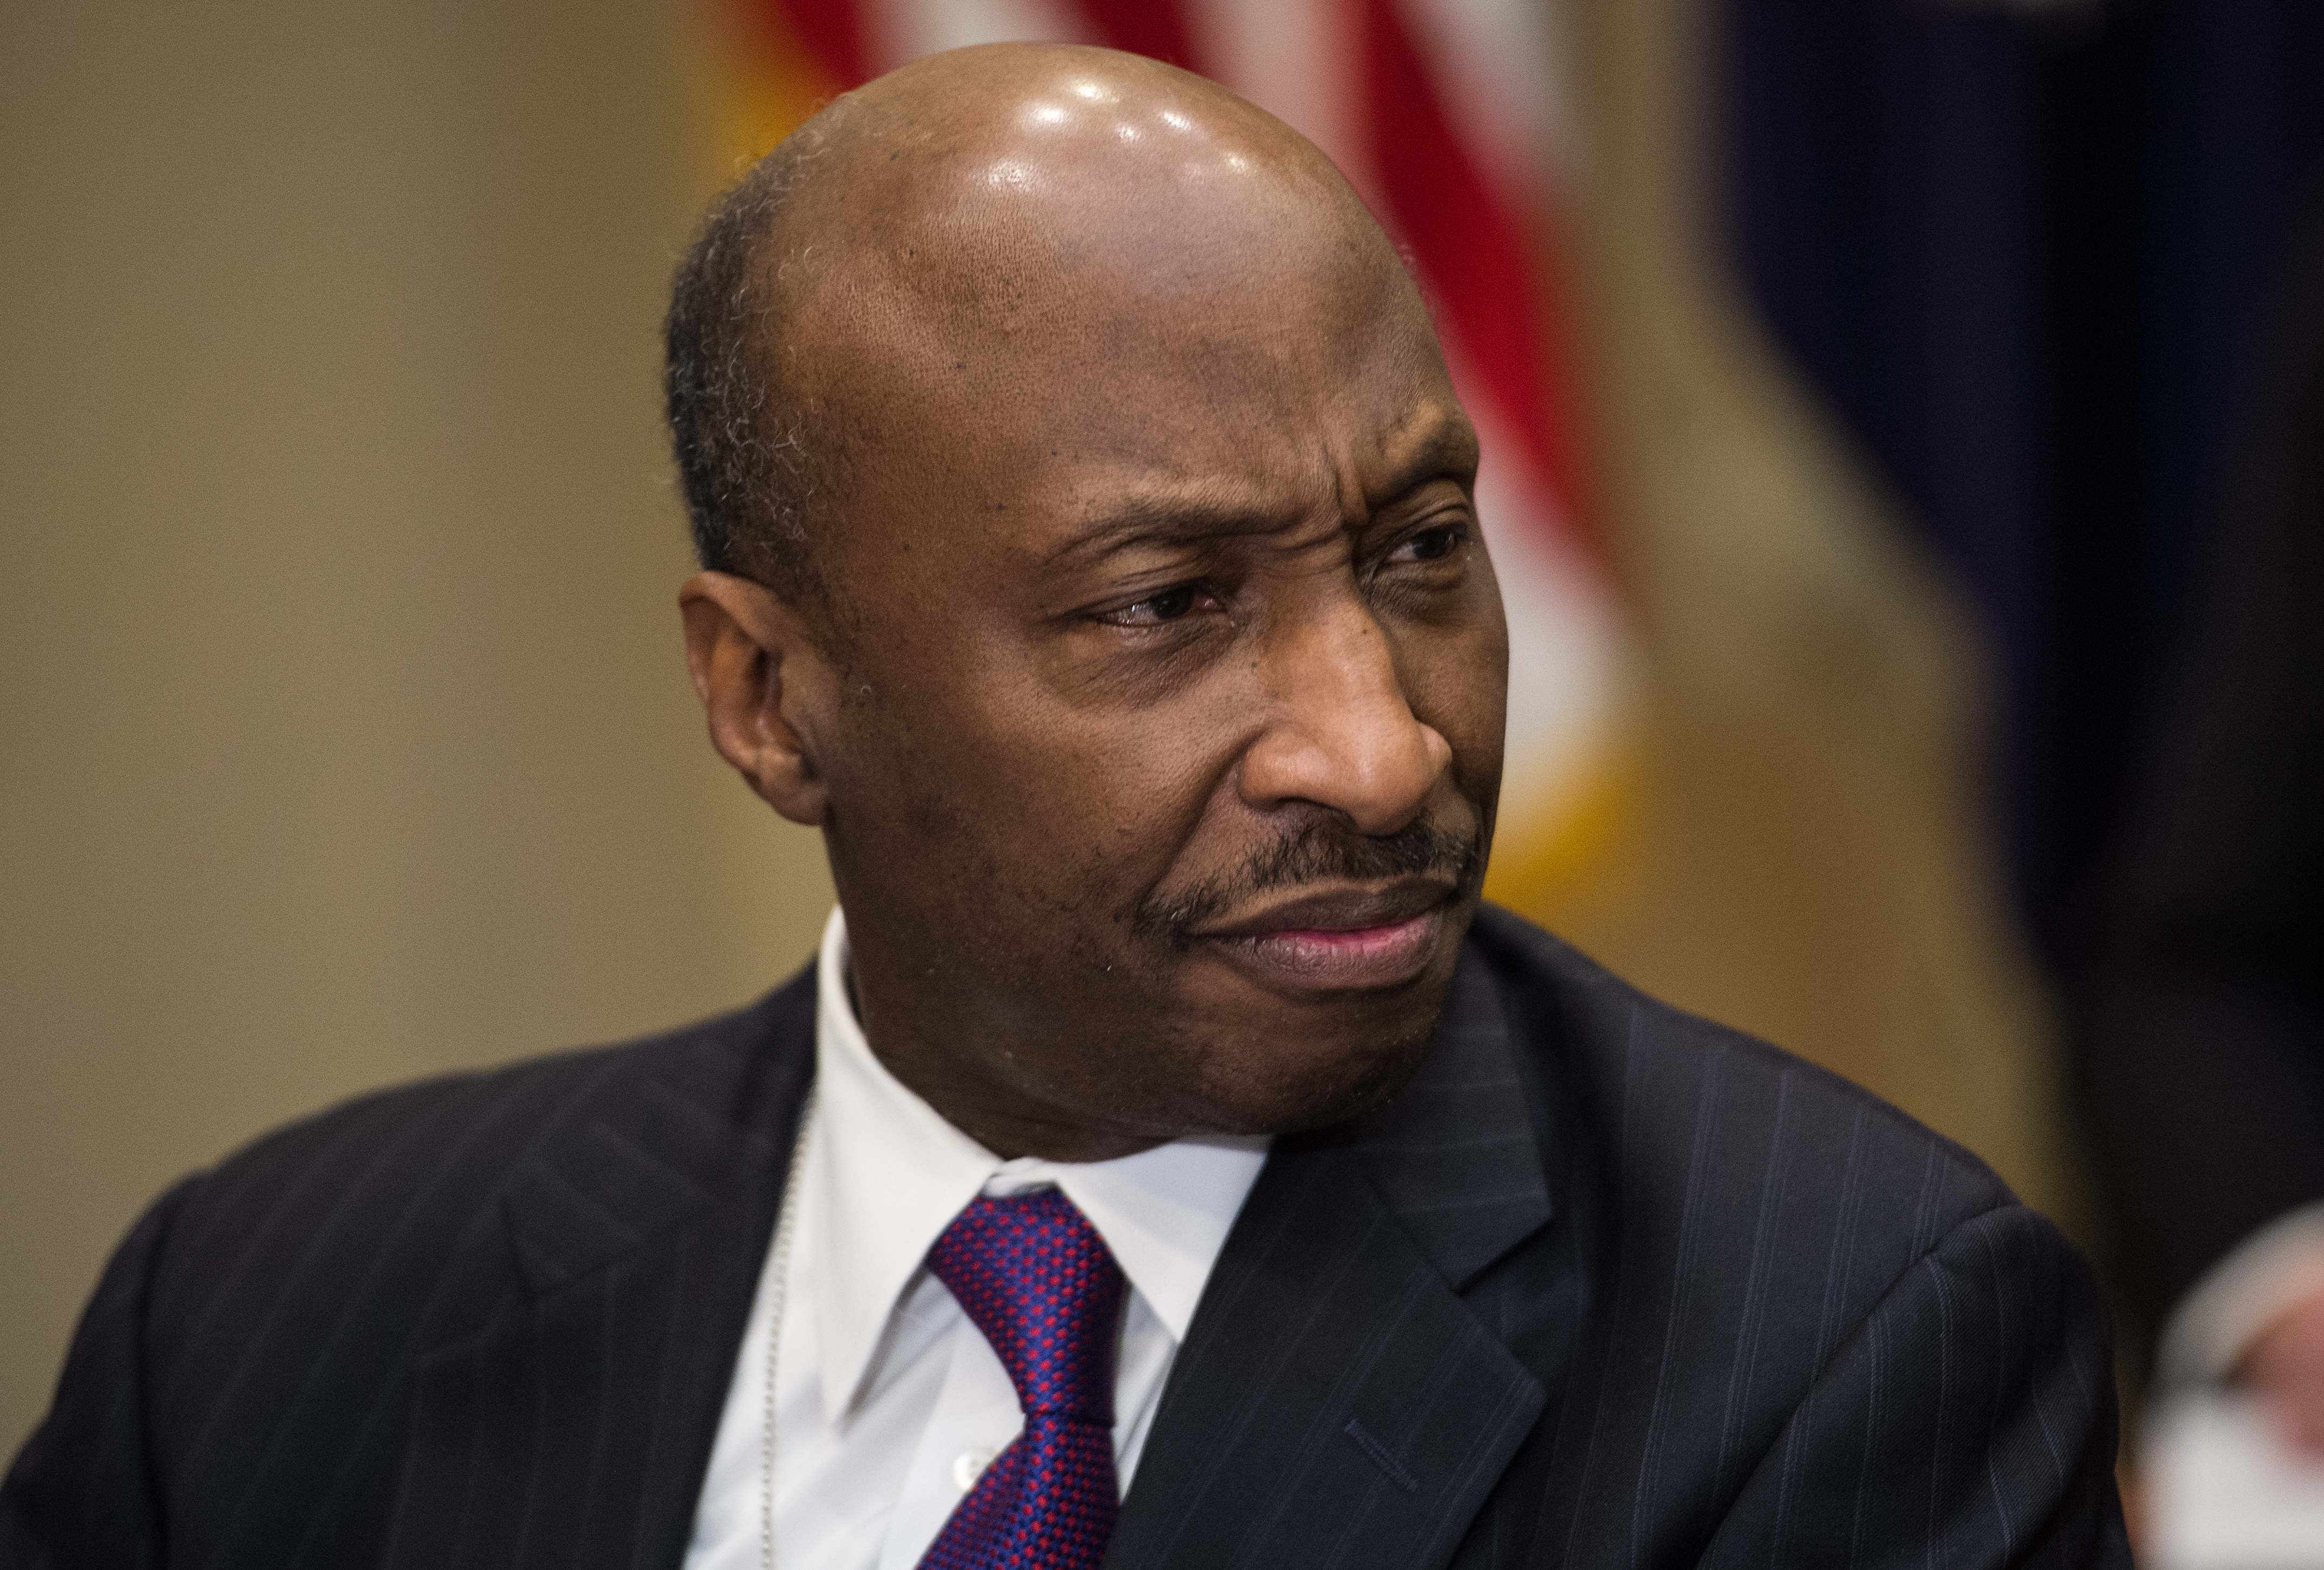 WATCH – Merck CEO Kenneth Frazier: George Floyd ‘Could be Me’